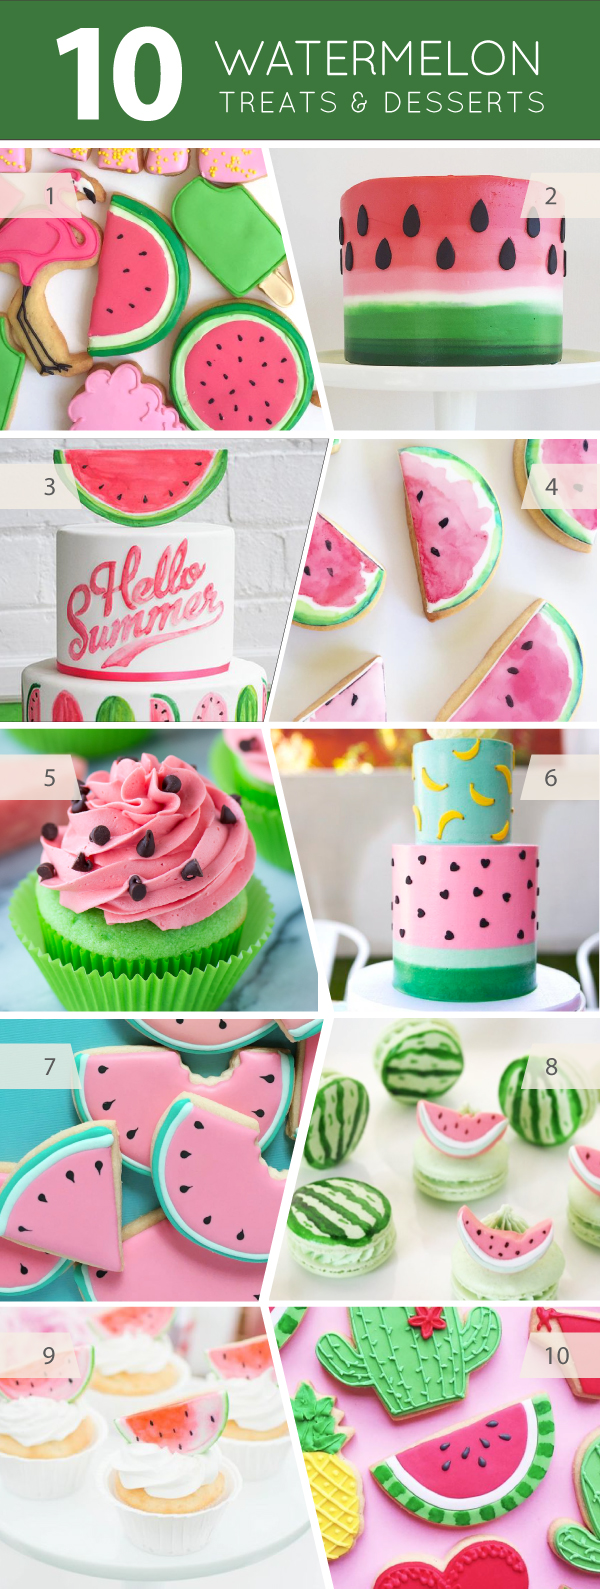 10 Watermelon Treats - cakes, cupcakes, cookies, macarons and desserts for watermelon lovers | on TheCakeBlog.com